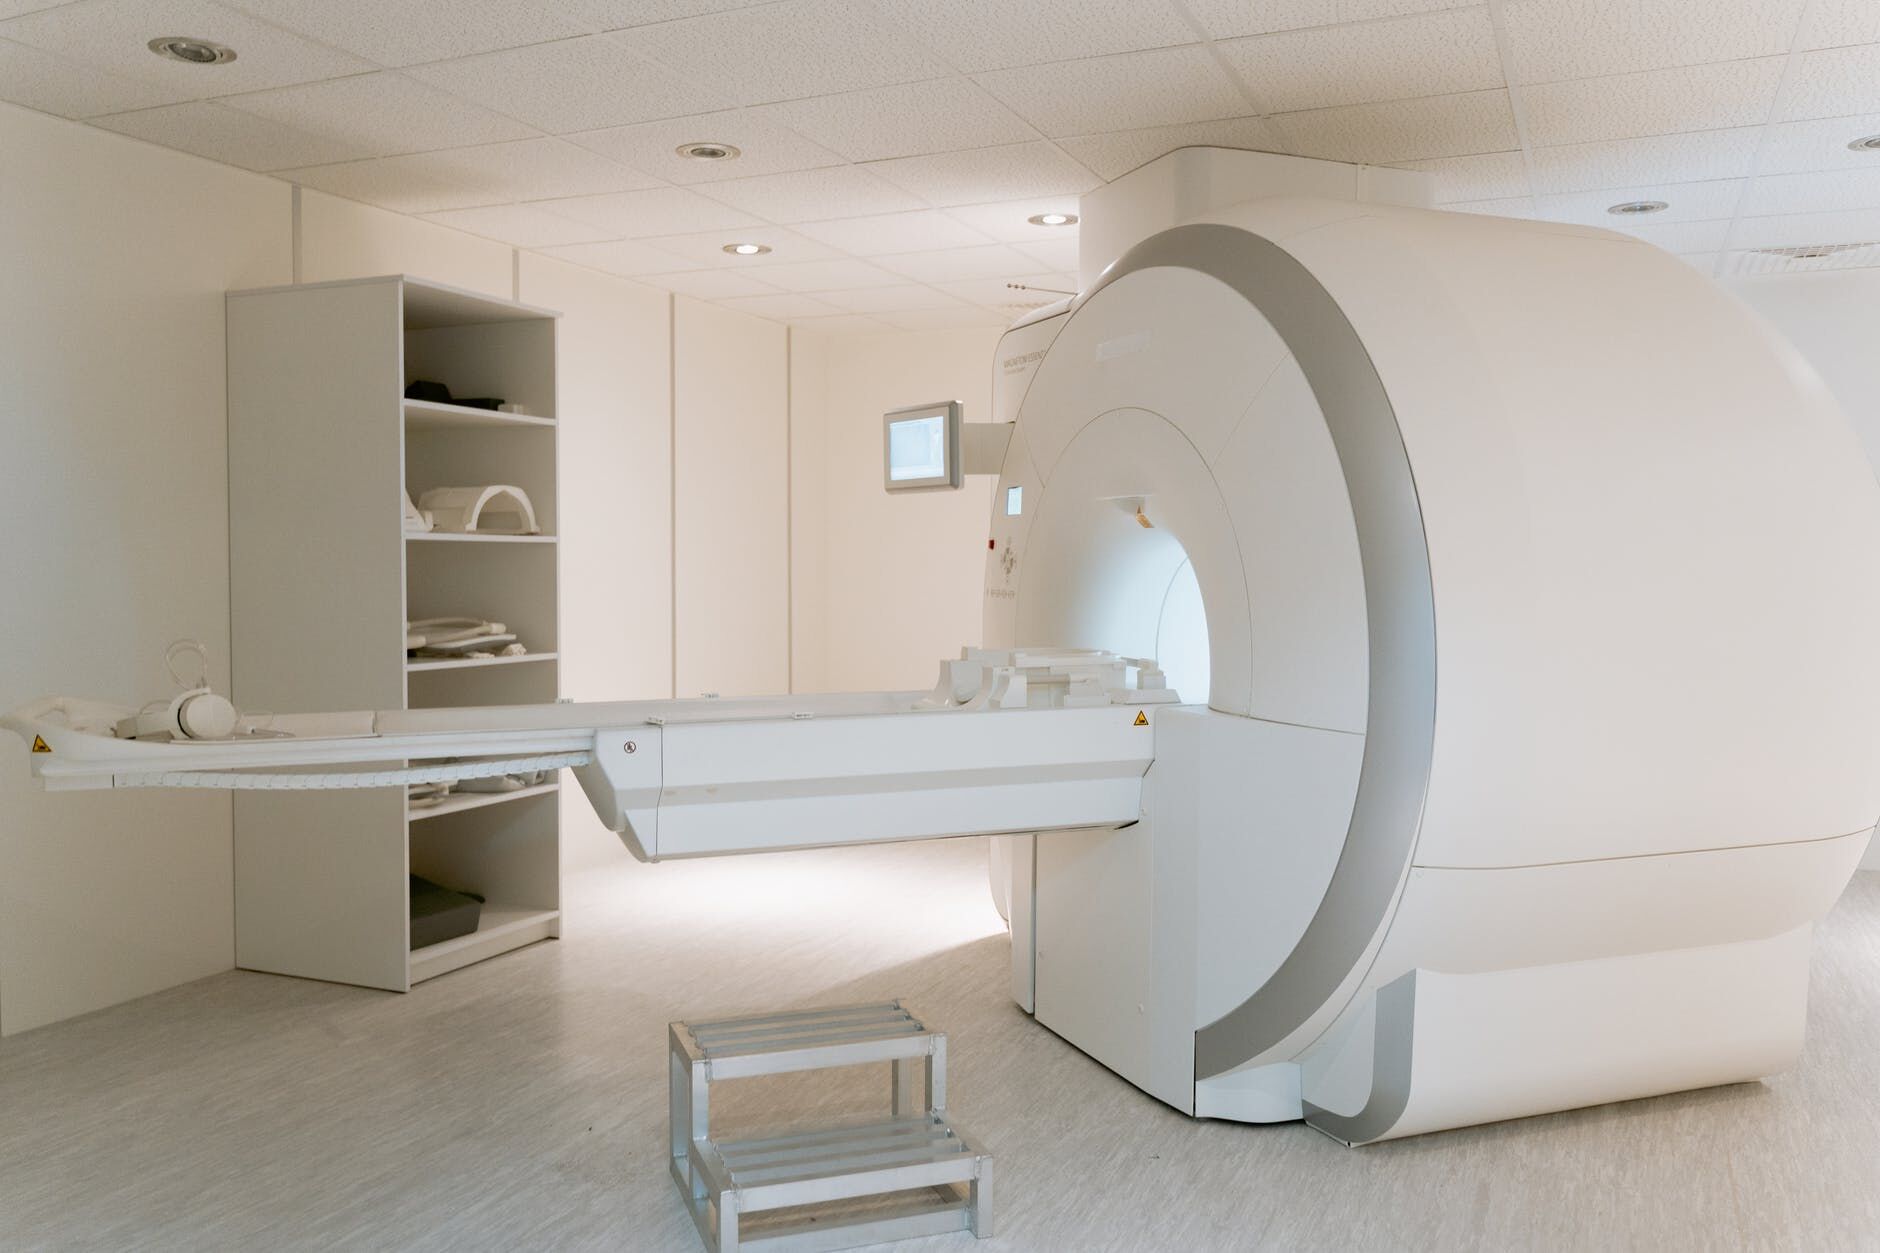 New MRI Unit project underway at Wexford General Hospital